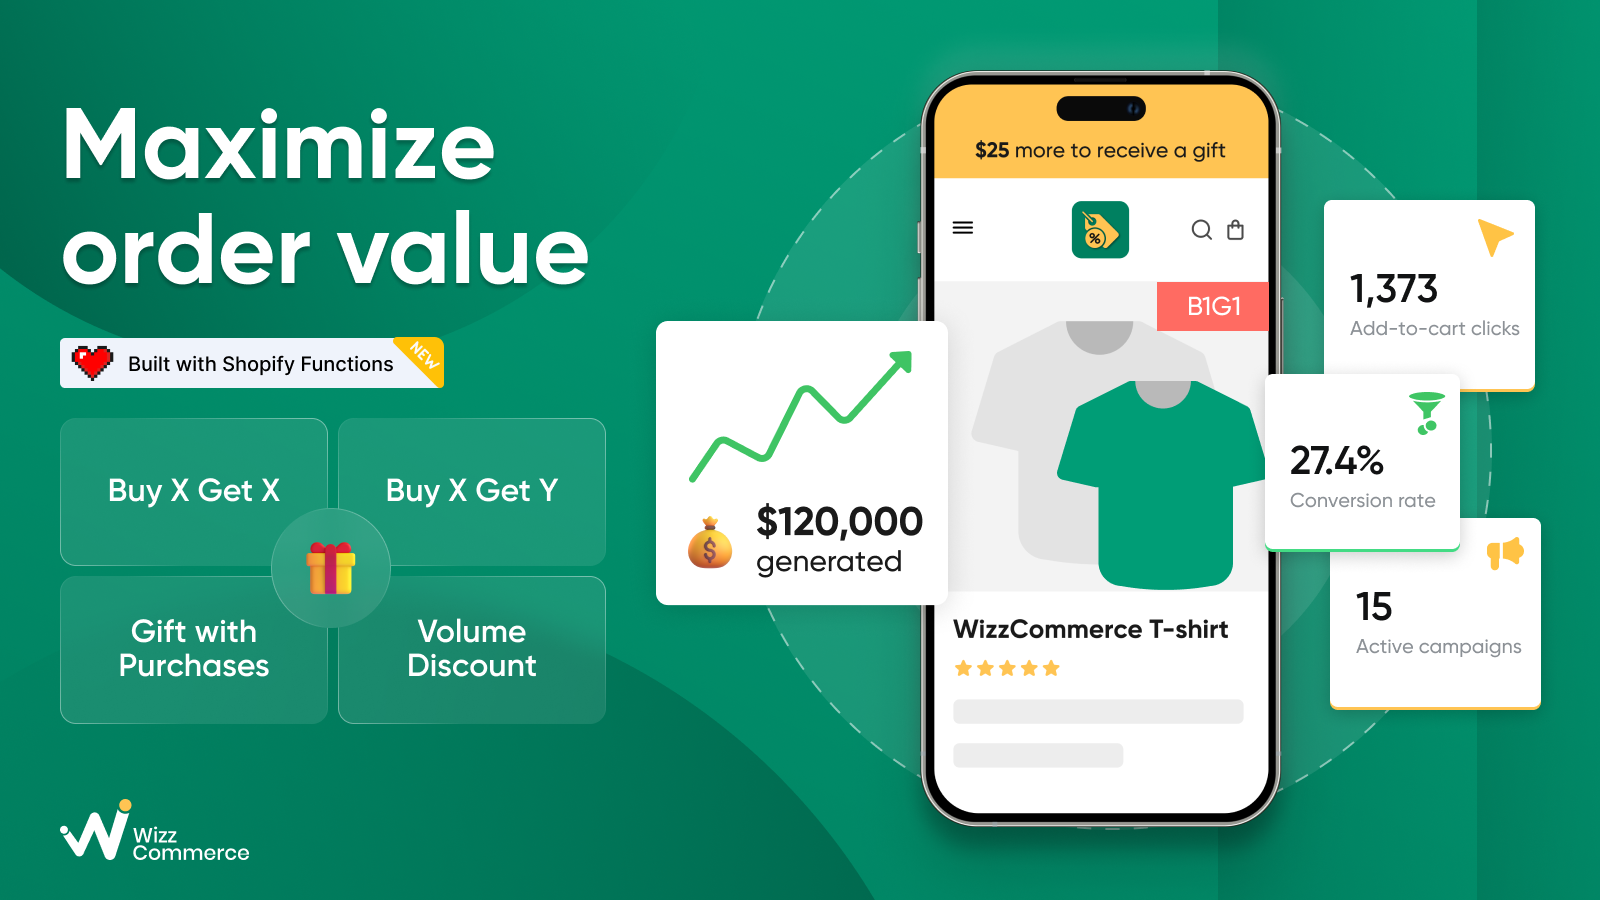 BOGO+ by WizzCommerce maximizes order value with 4 campaigns